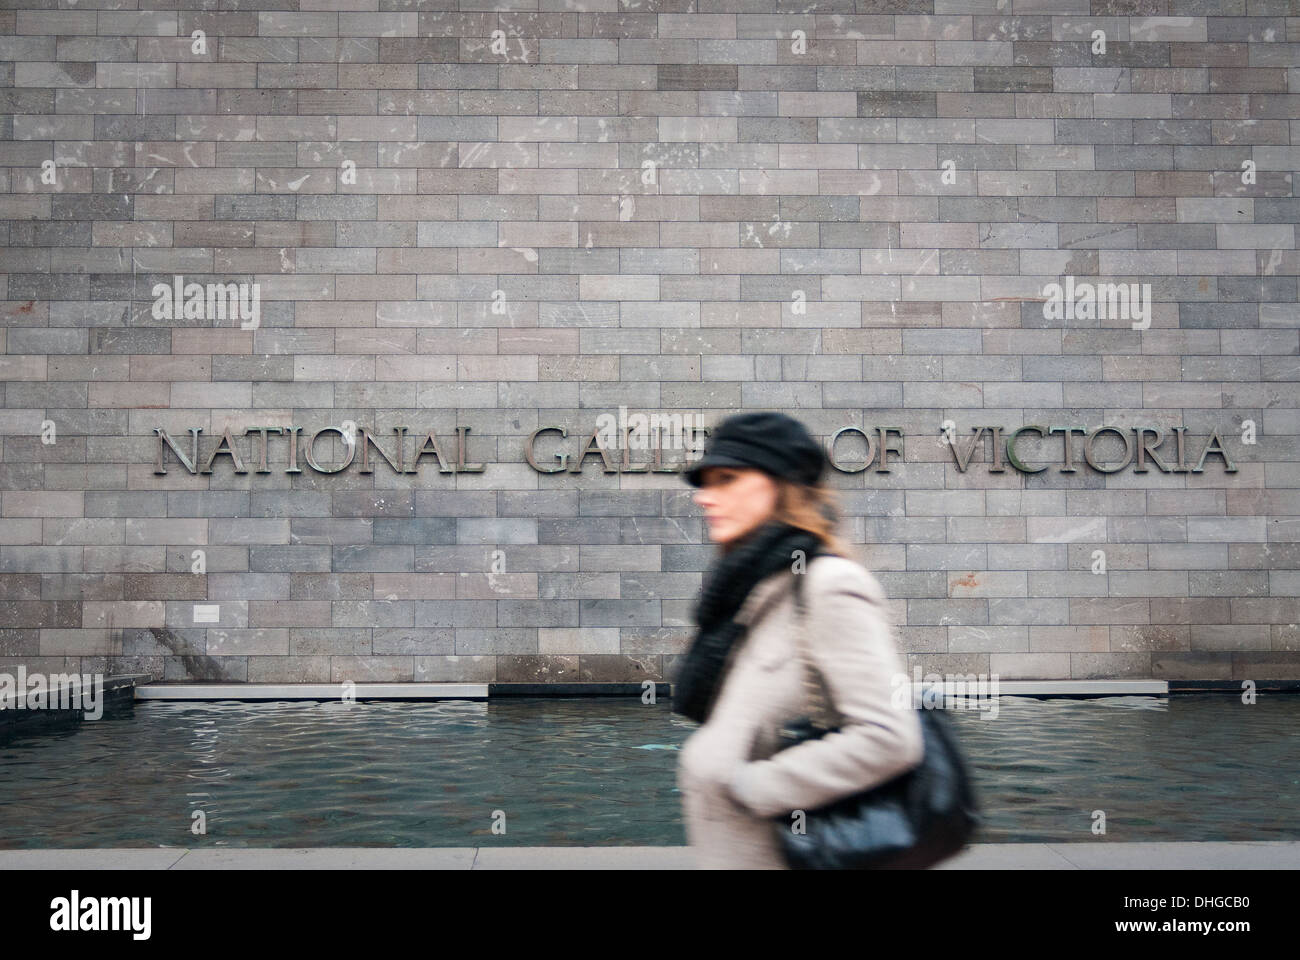 National Gallery of Victoria Stockfoto